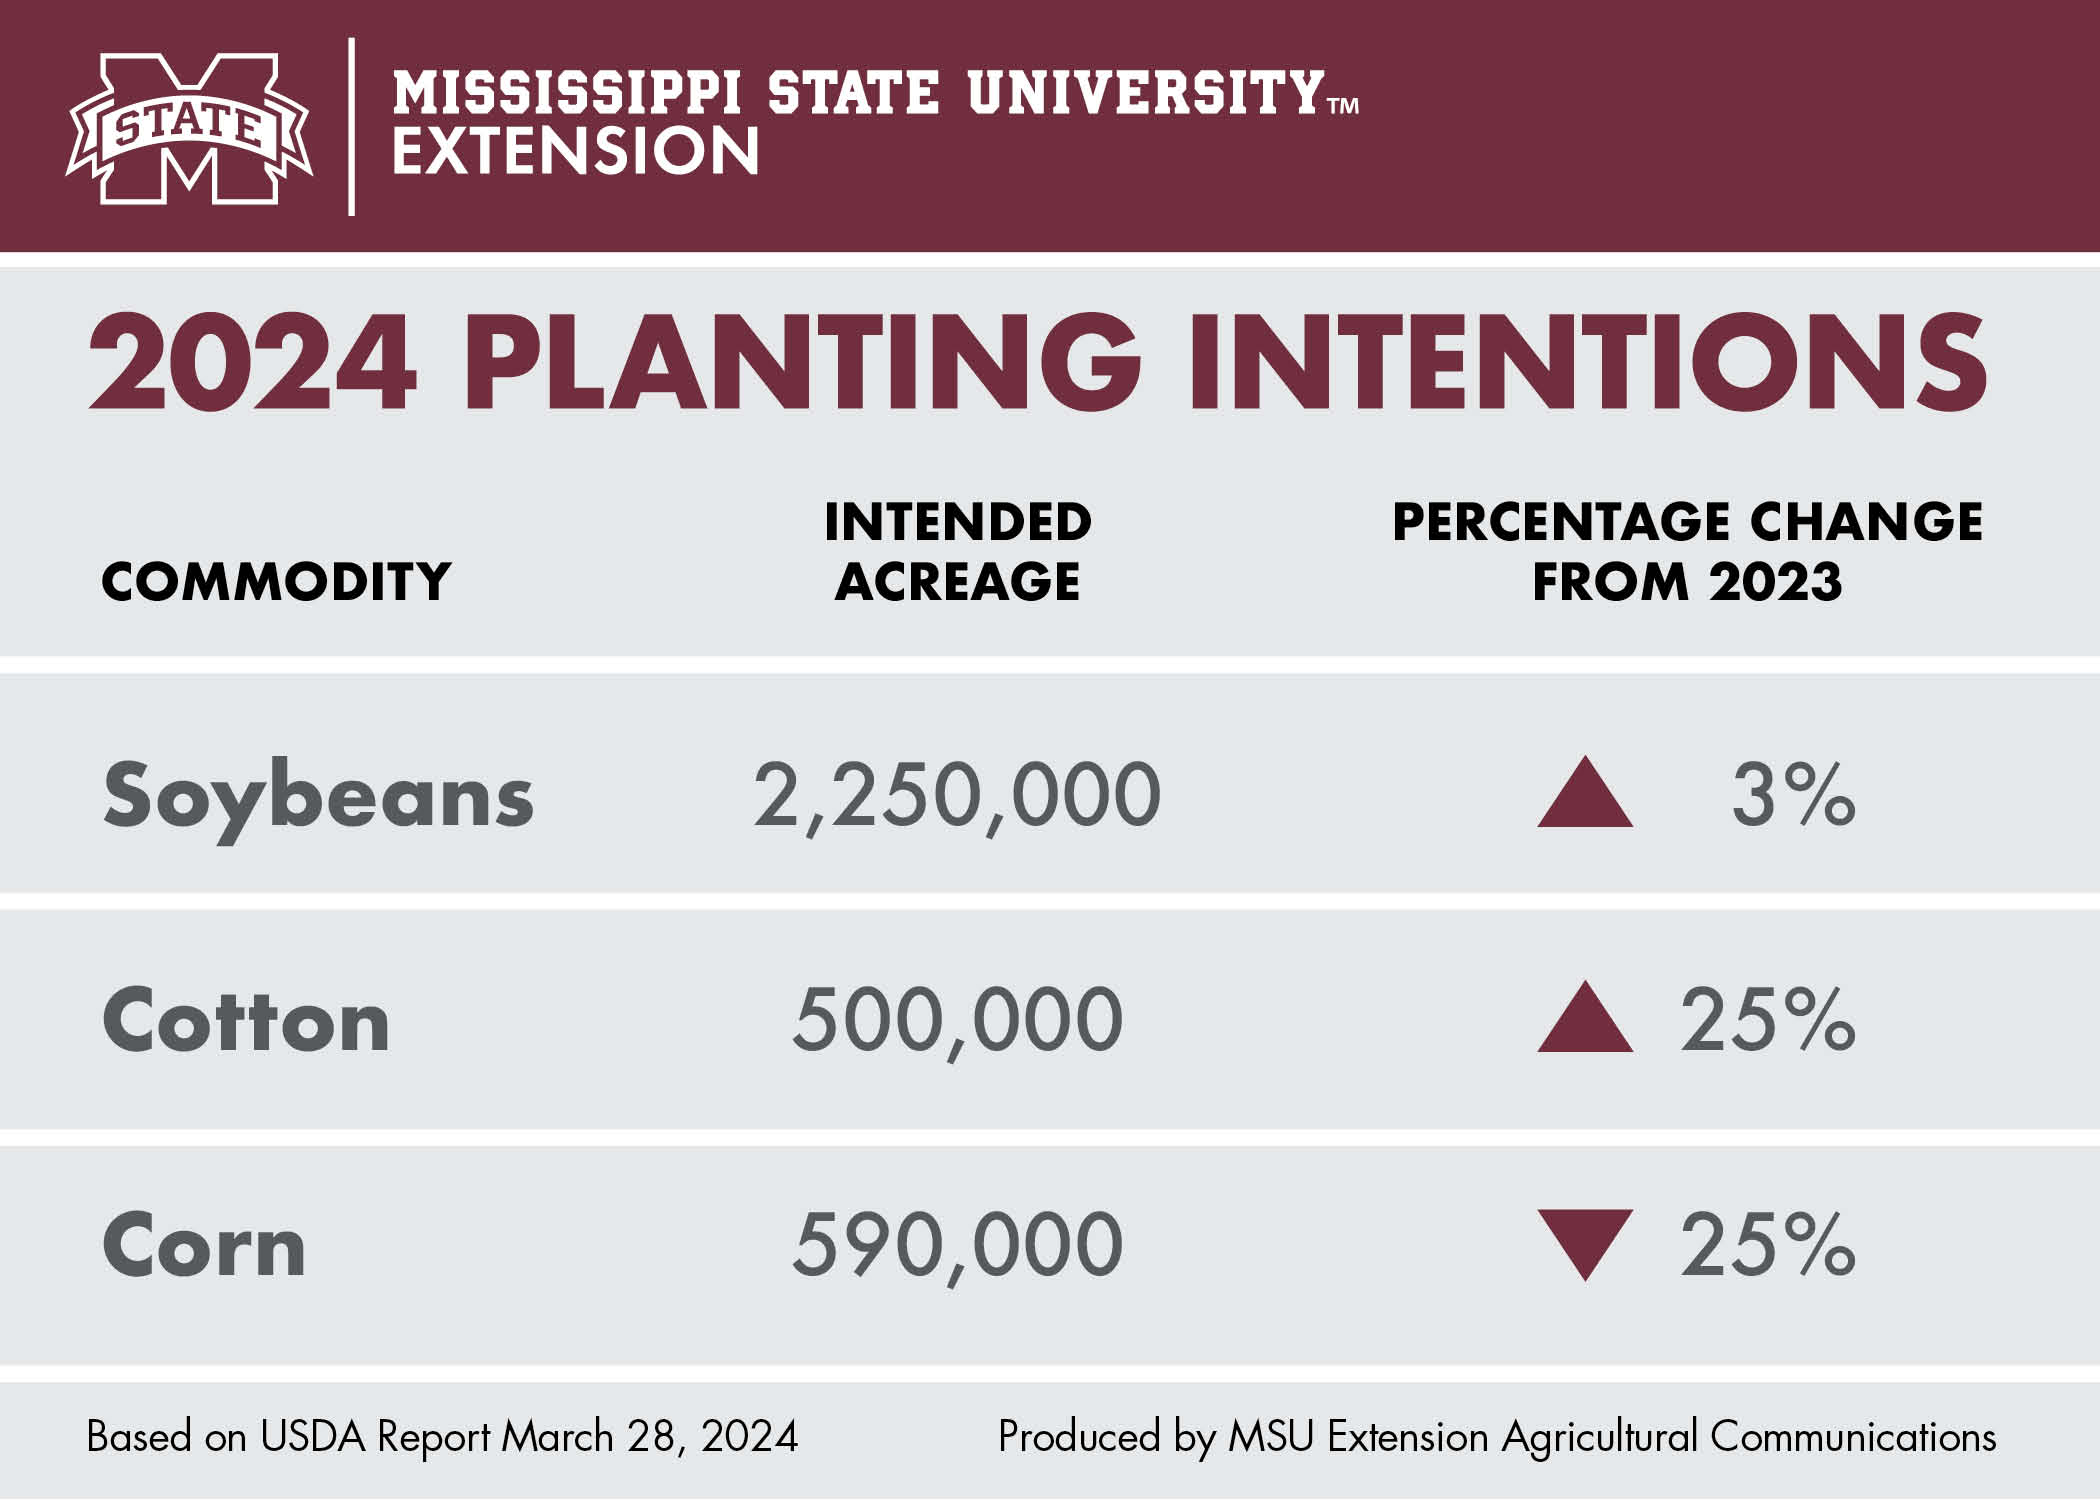 2024 Planting Intentions (Produced by MSU Extension Agricultural Communications)